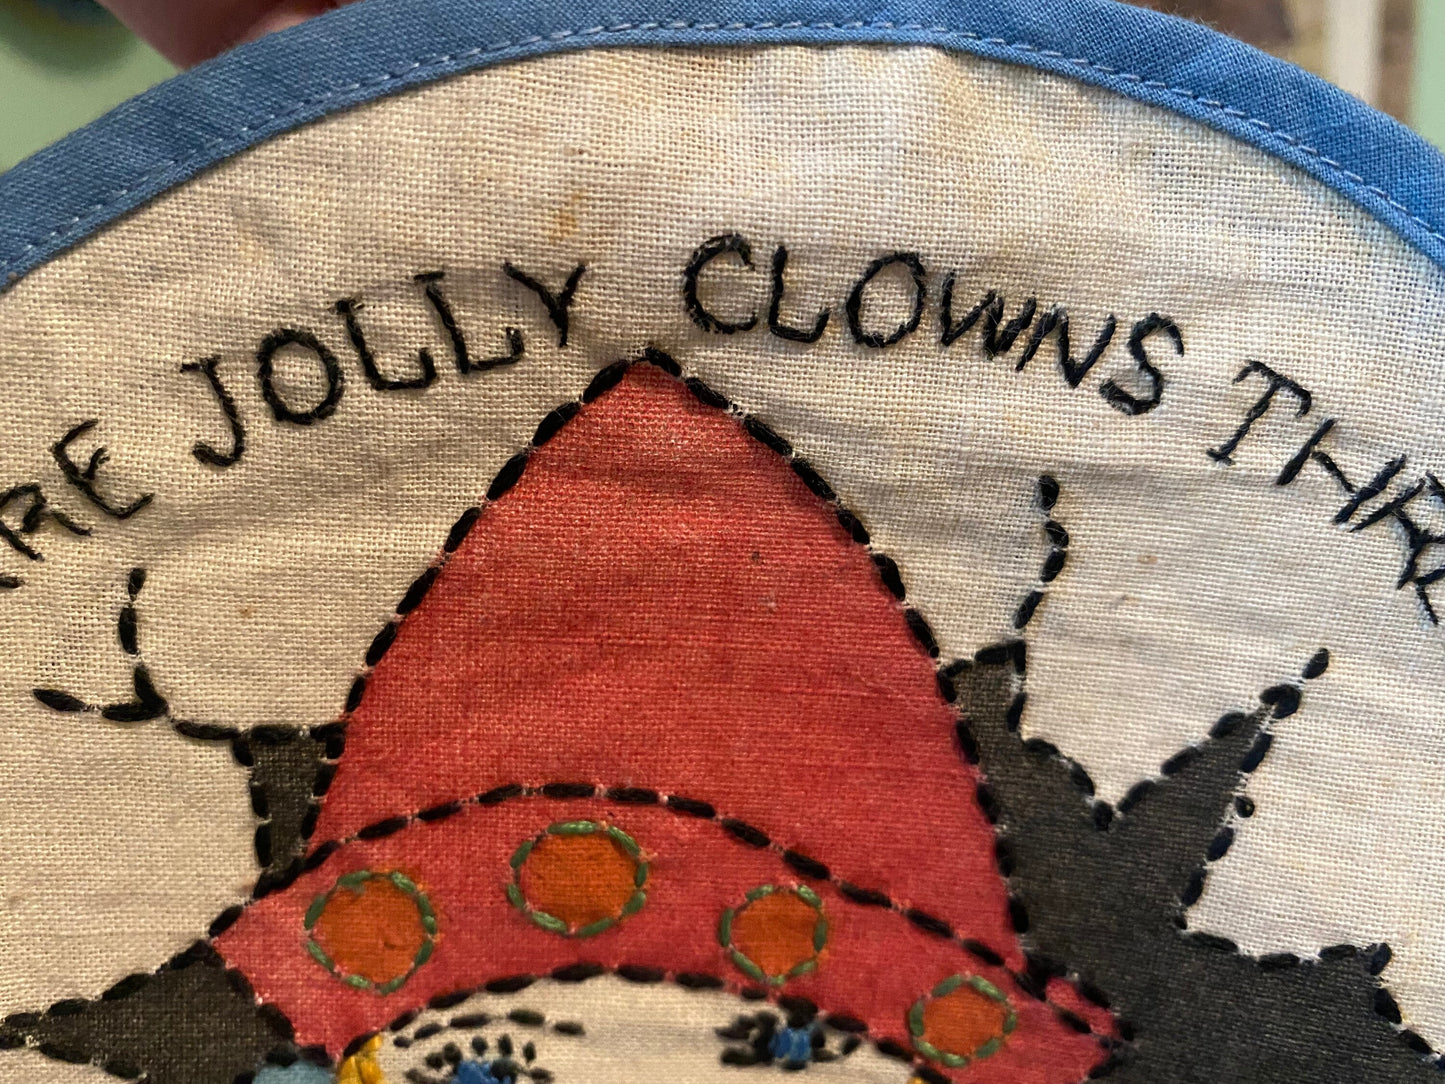 Vintage clown pot holder. Embroidered kitschy kitchen decor. Weird creepy wall hanging hot pad for hot pots. Kitsch gift for clown collector